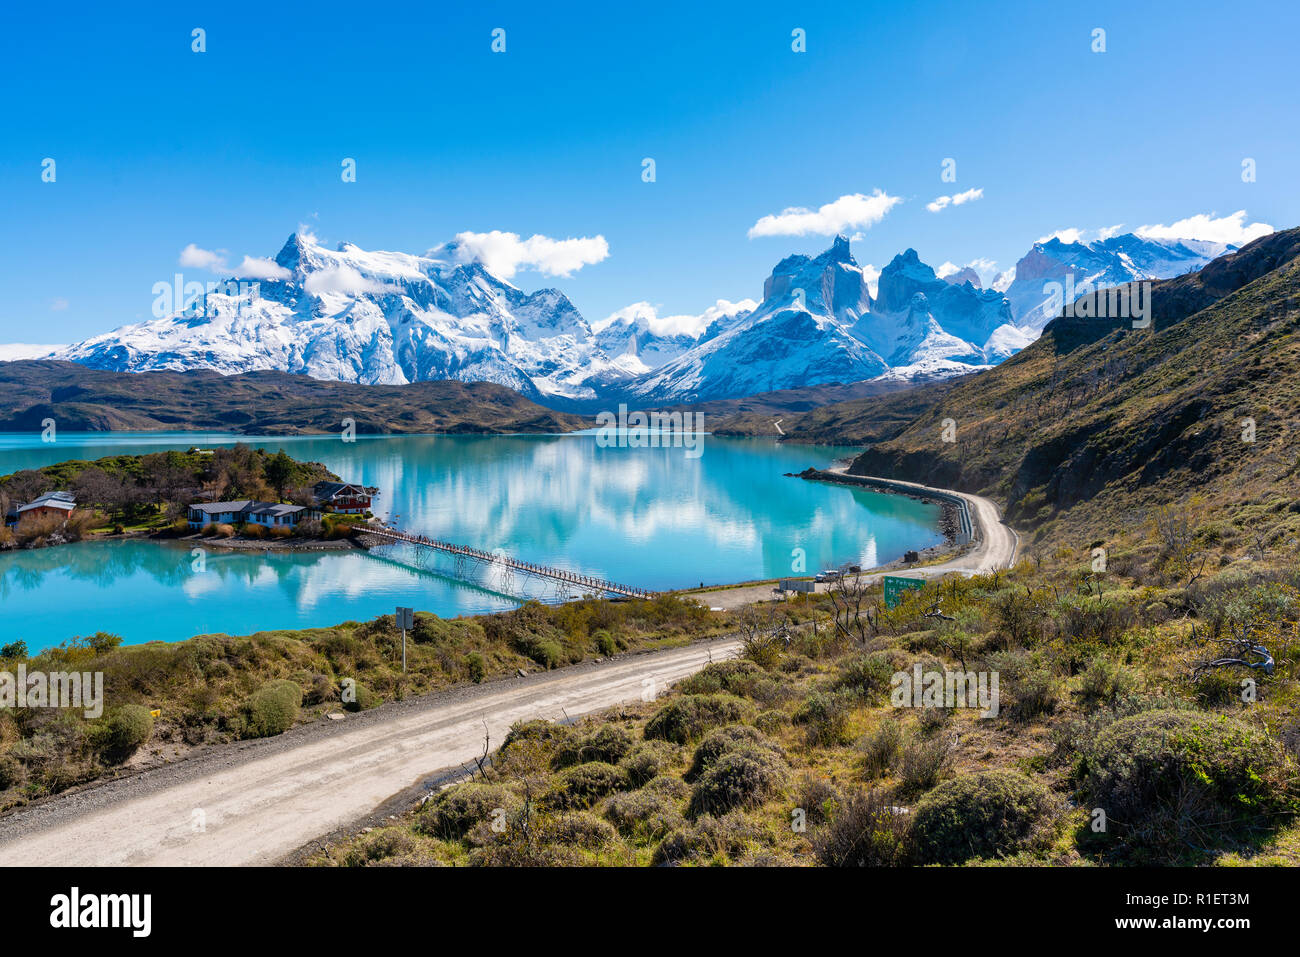 Berge und See im Torres del Paine Nationalpark in Chile Stockfoto